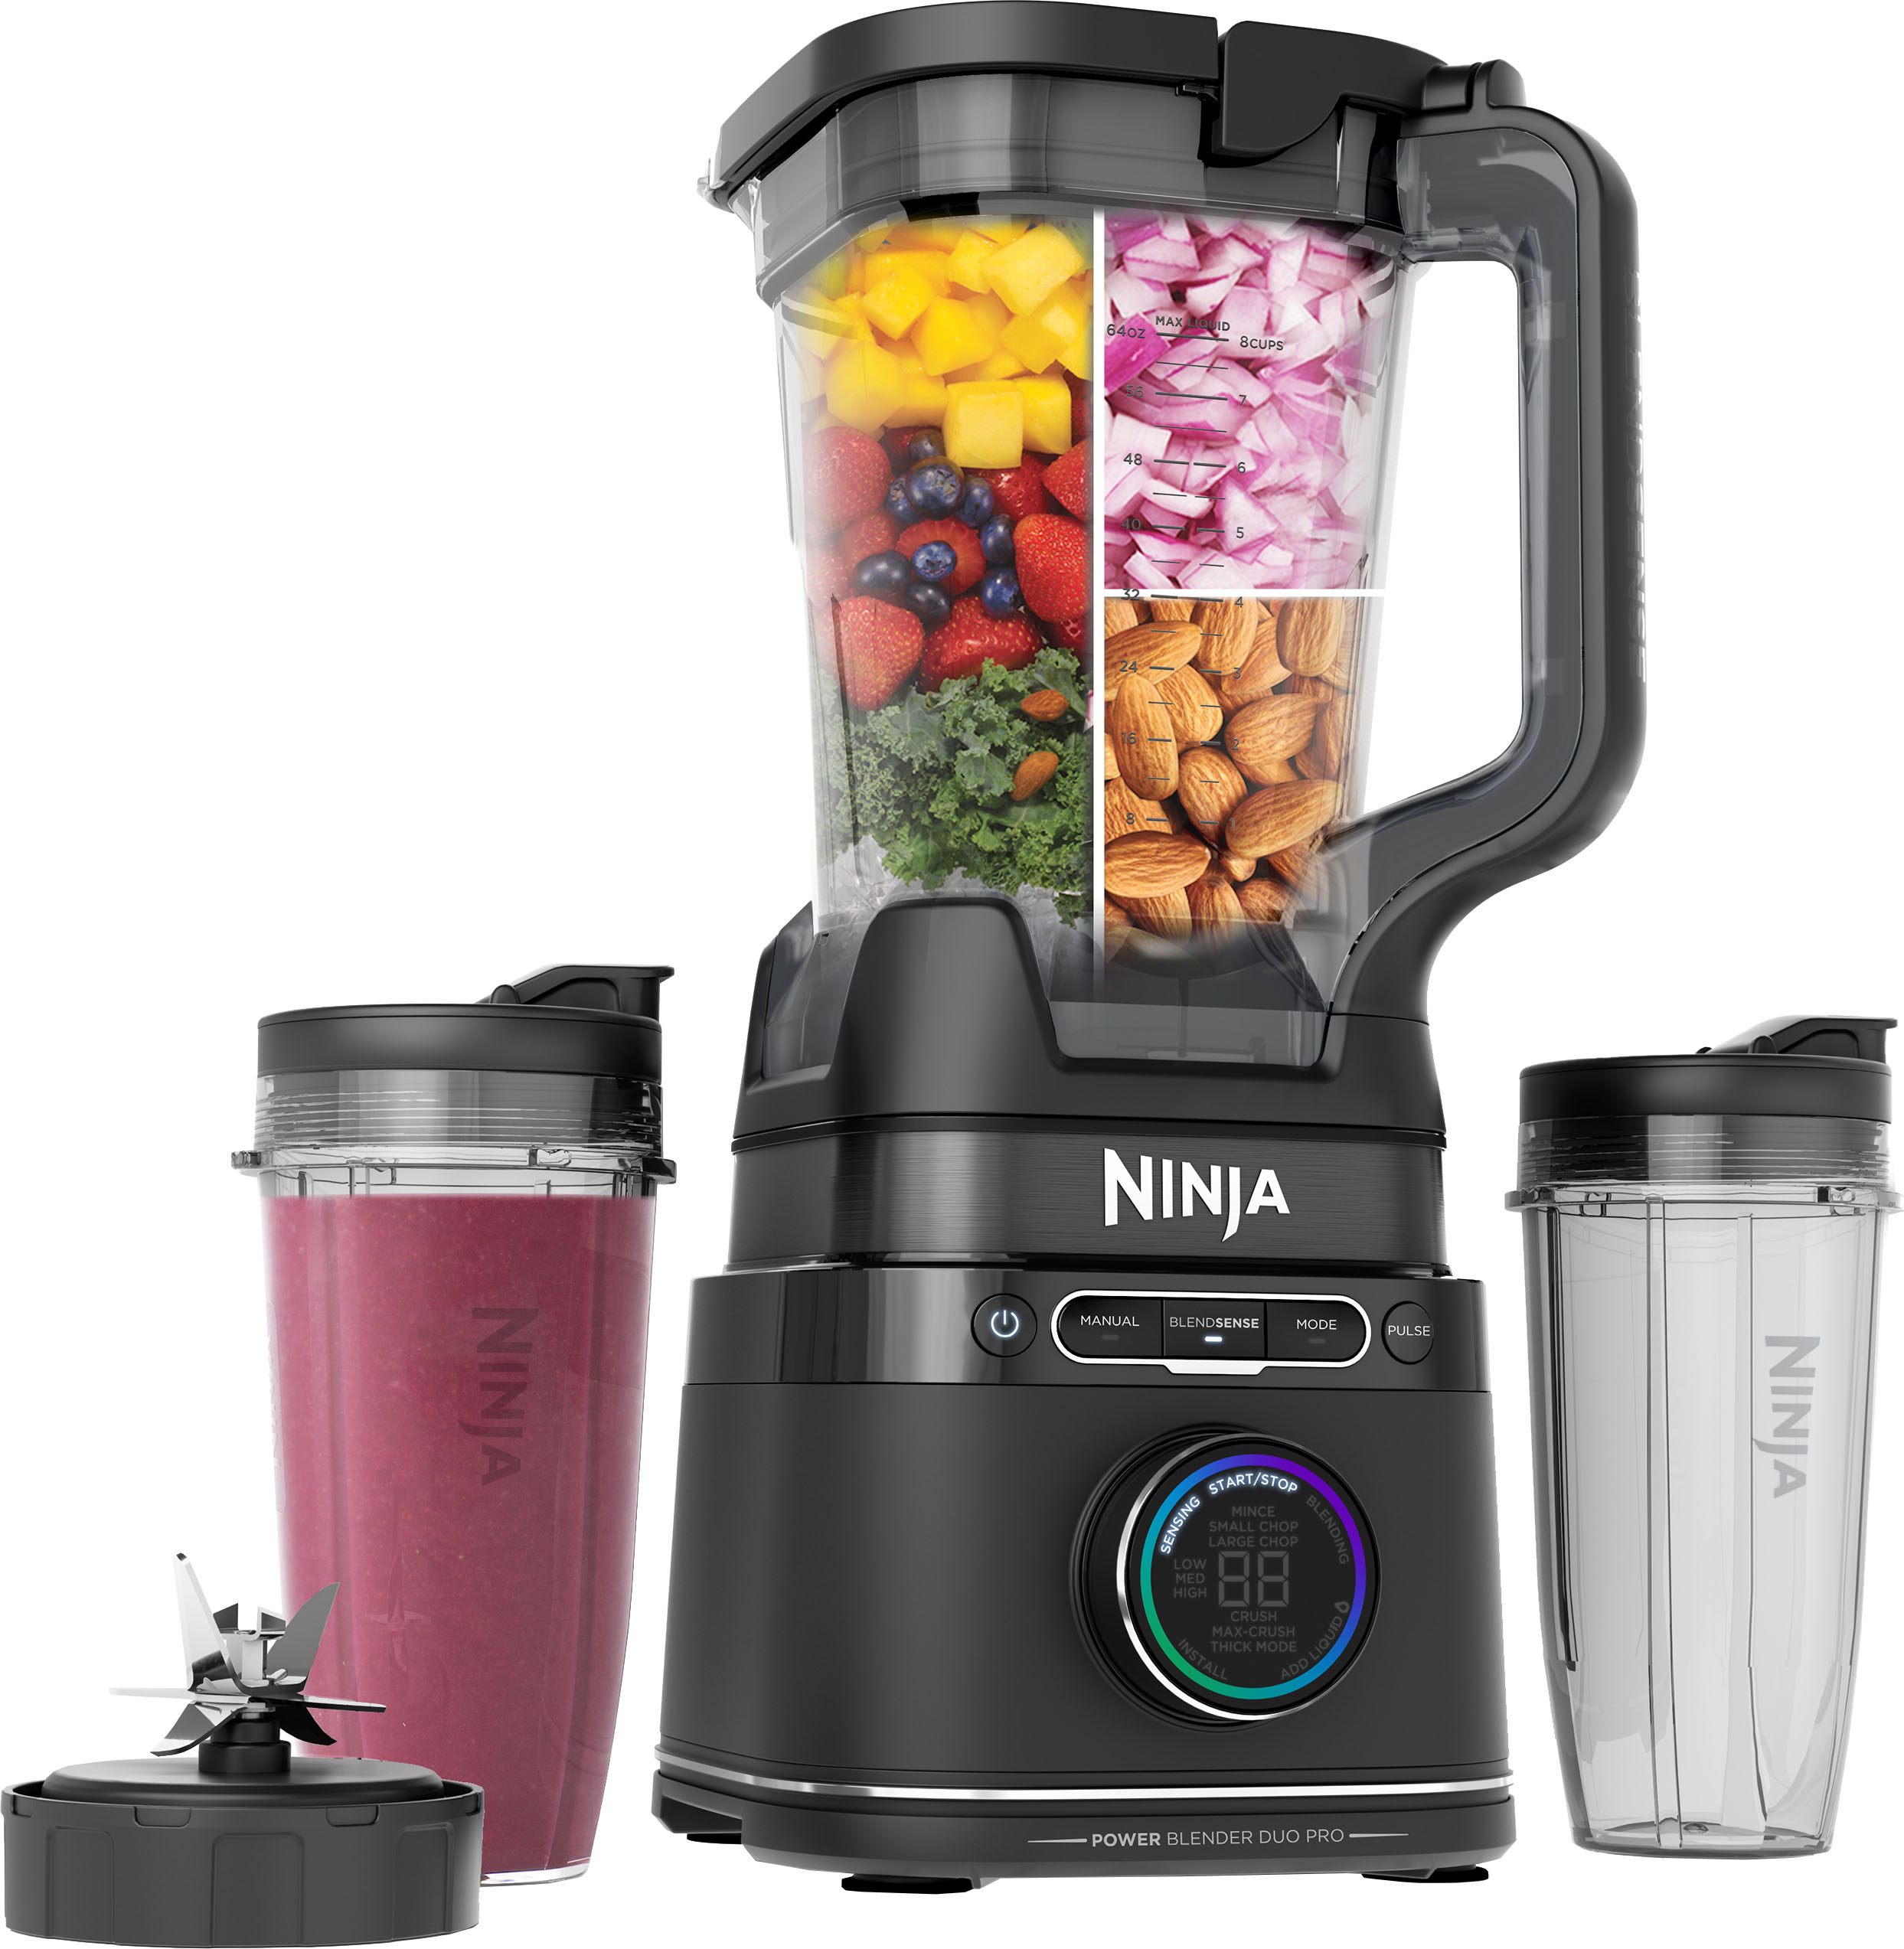 Ninja Professional Plus Blender with Auto-iQ and 72-Ounce Total Crushing Pitcher & Lid